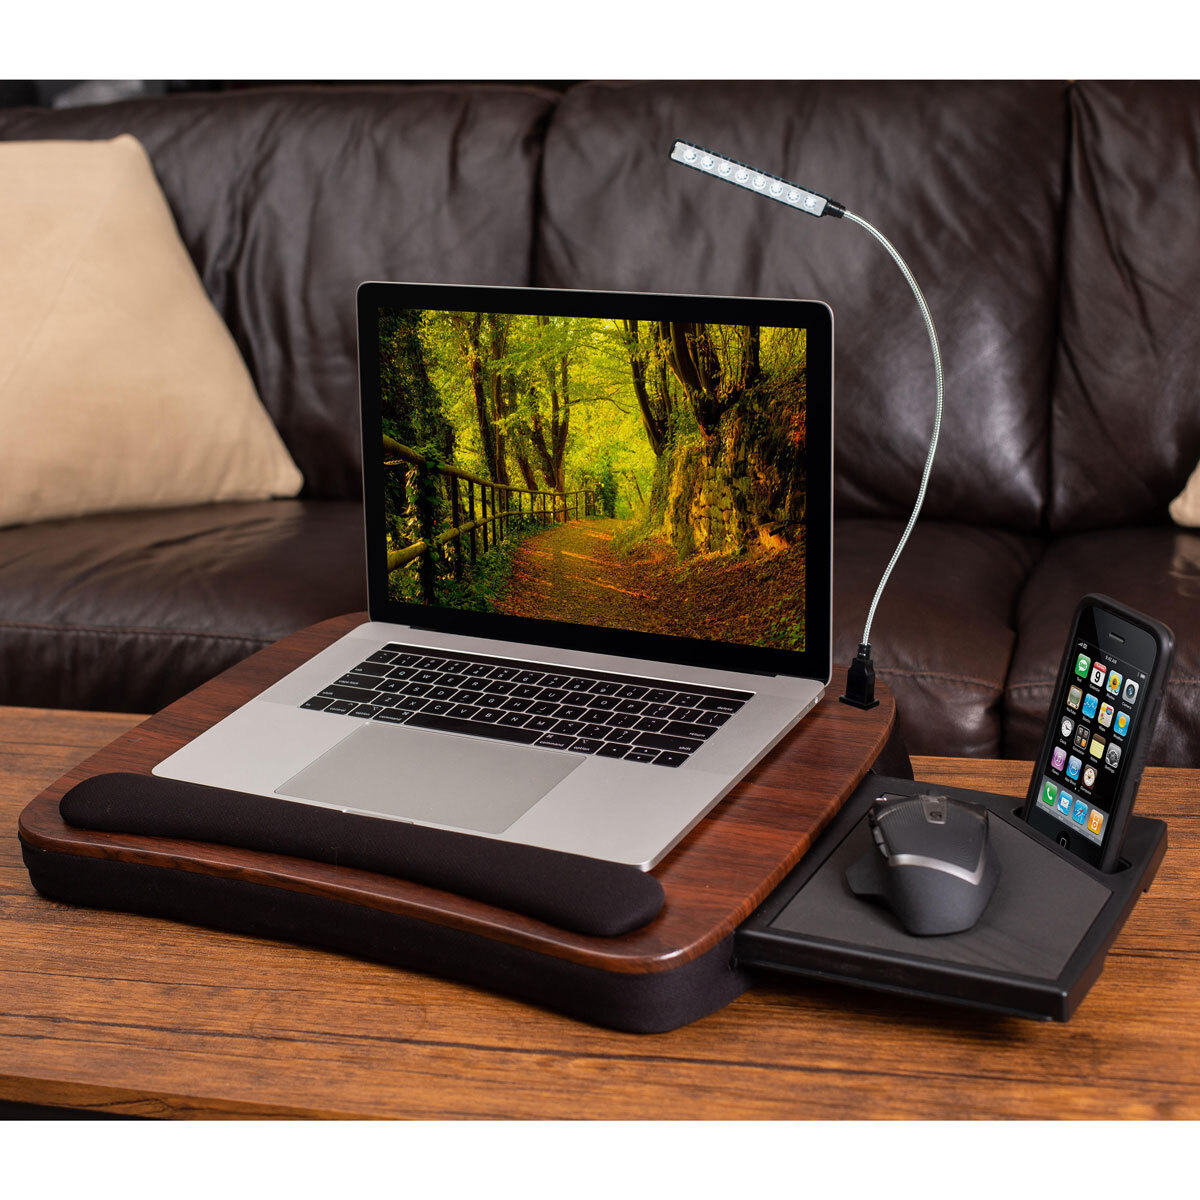 Birdrock Multi-Tasking Lap Desk with Mouse Deck and Light in Brown